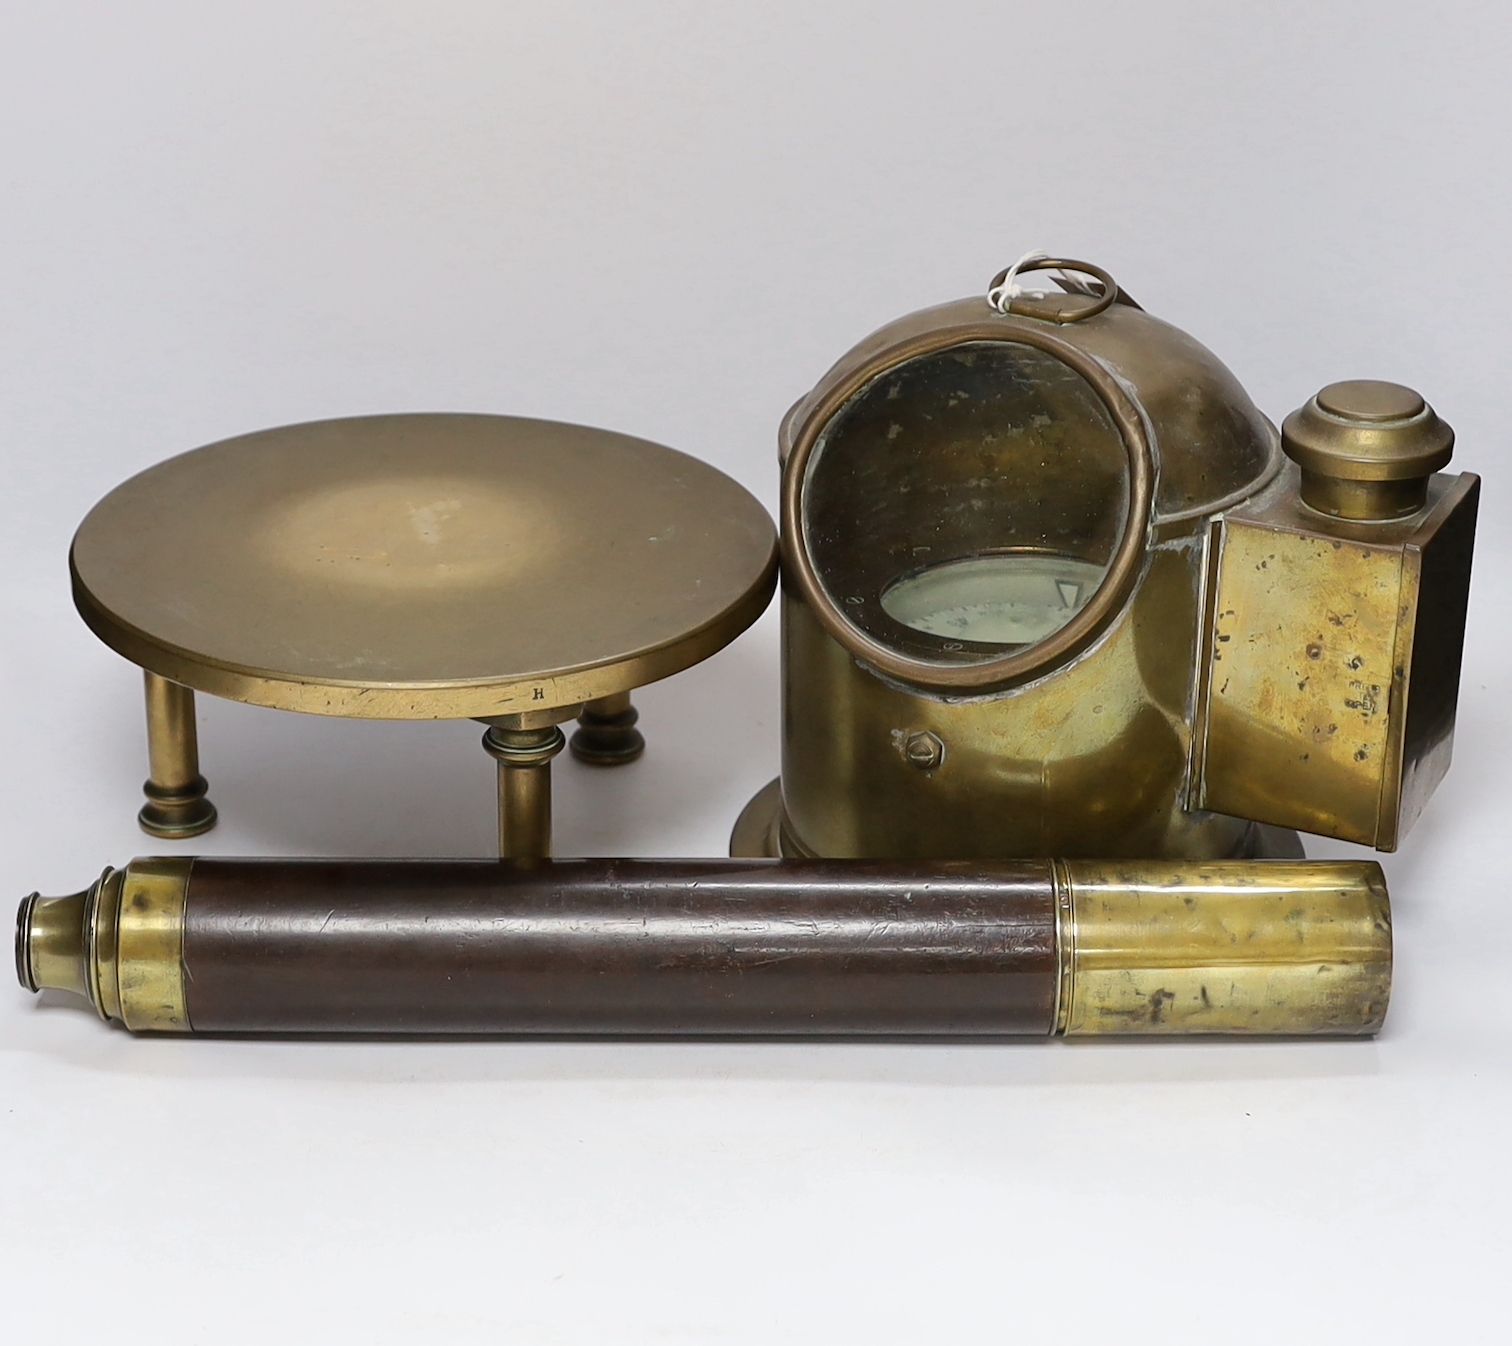 A ship’s brass binnacle containing a Sestrel compass and with a built in oil lamp, a bronze circular stand and a single draw telescope, binnacle 23cm high